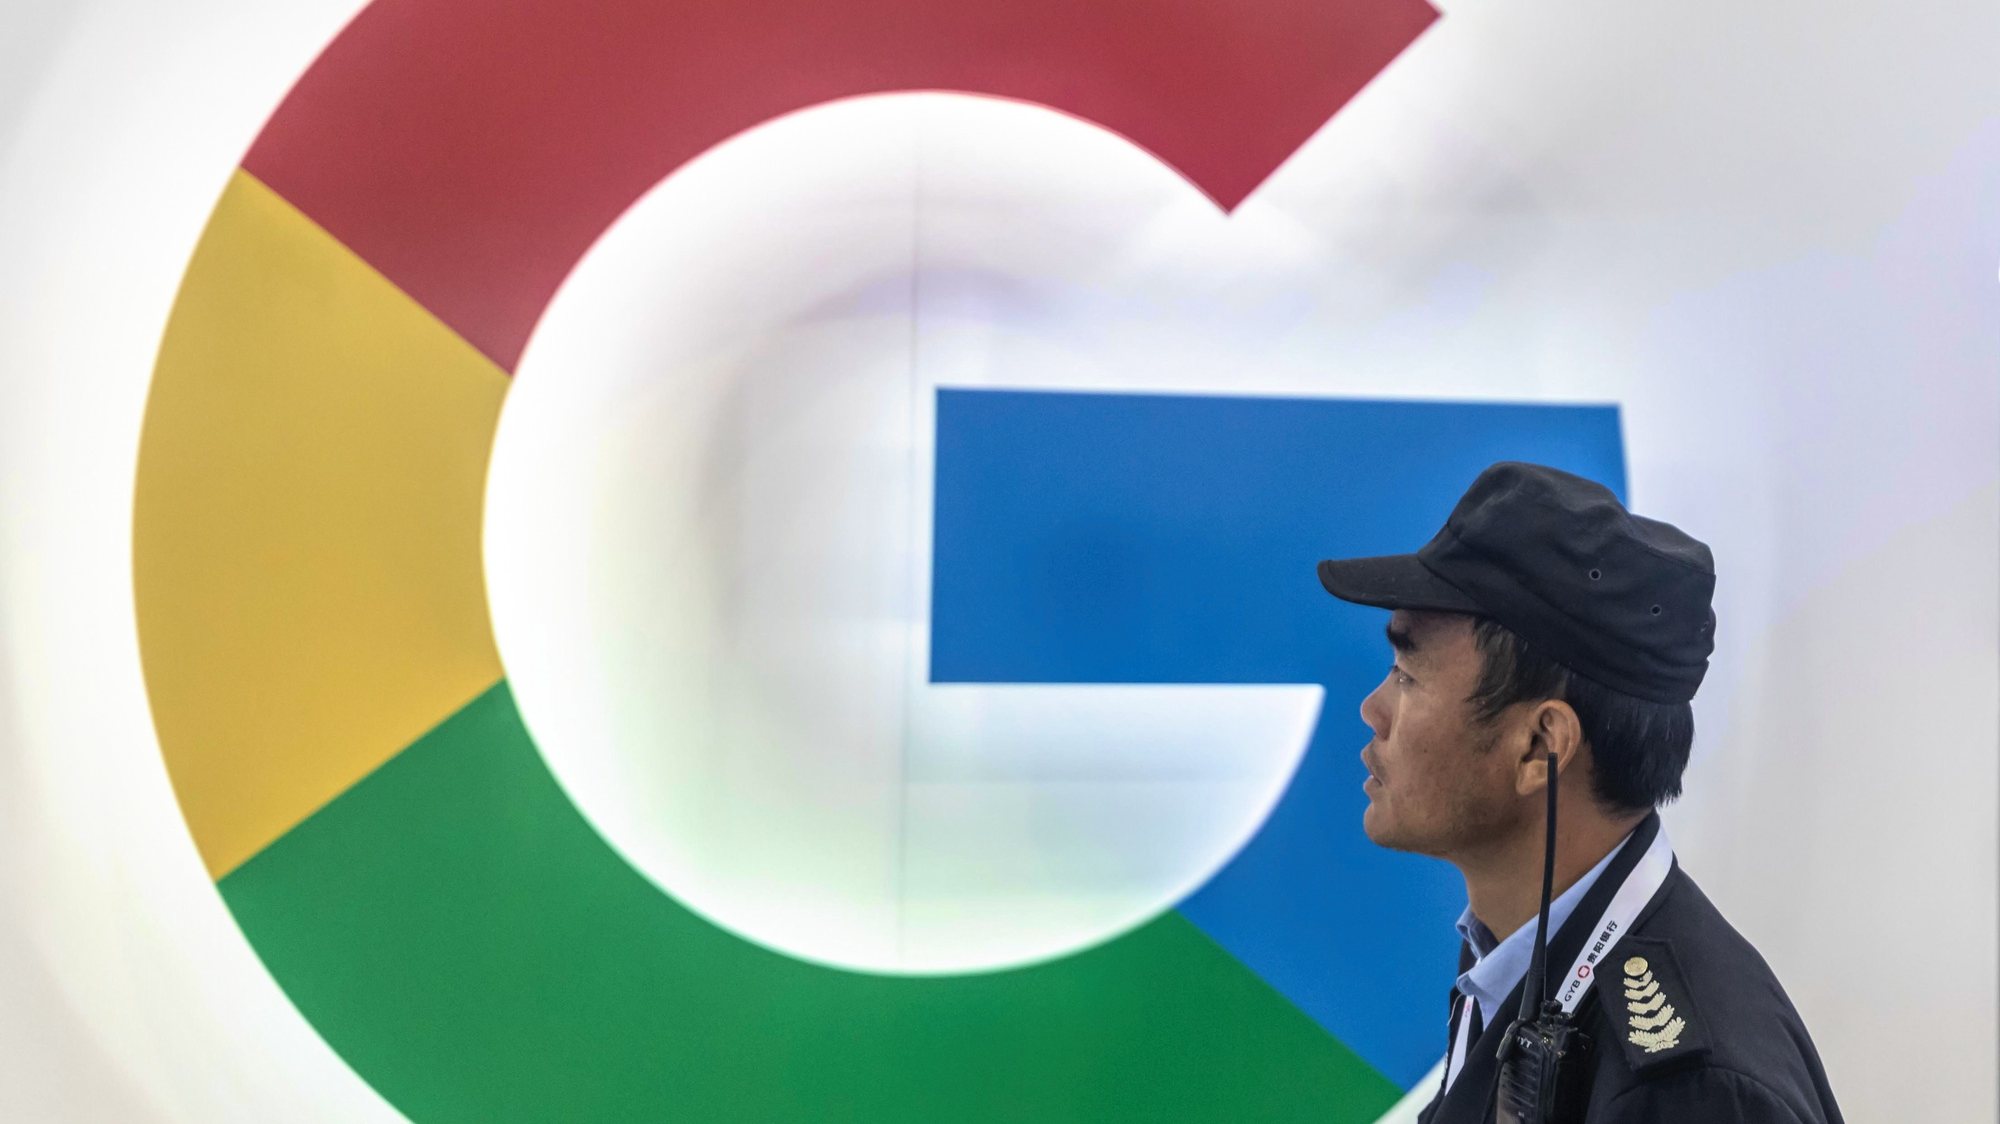 epa08257756 (FILE) - A security guard passes a Google booth during Big Data Expo in Guiyang, Guizhou province, China, 26 May 2019 (reissued 29 February 2020). Google has expanded travel restritcion on employees after a person tested positive for coronavirus at the company&#039;s Zurich. According to media reports, by March employees will see restrctions on traveling to Japan, South Korea, China, Iran and parts of Italy.  EPA/ALEKSANDAR PLAVEVSKI